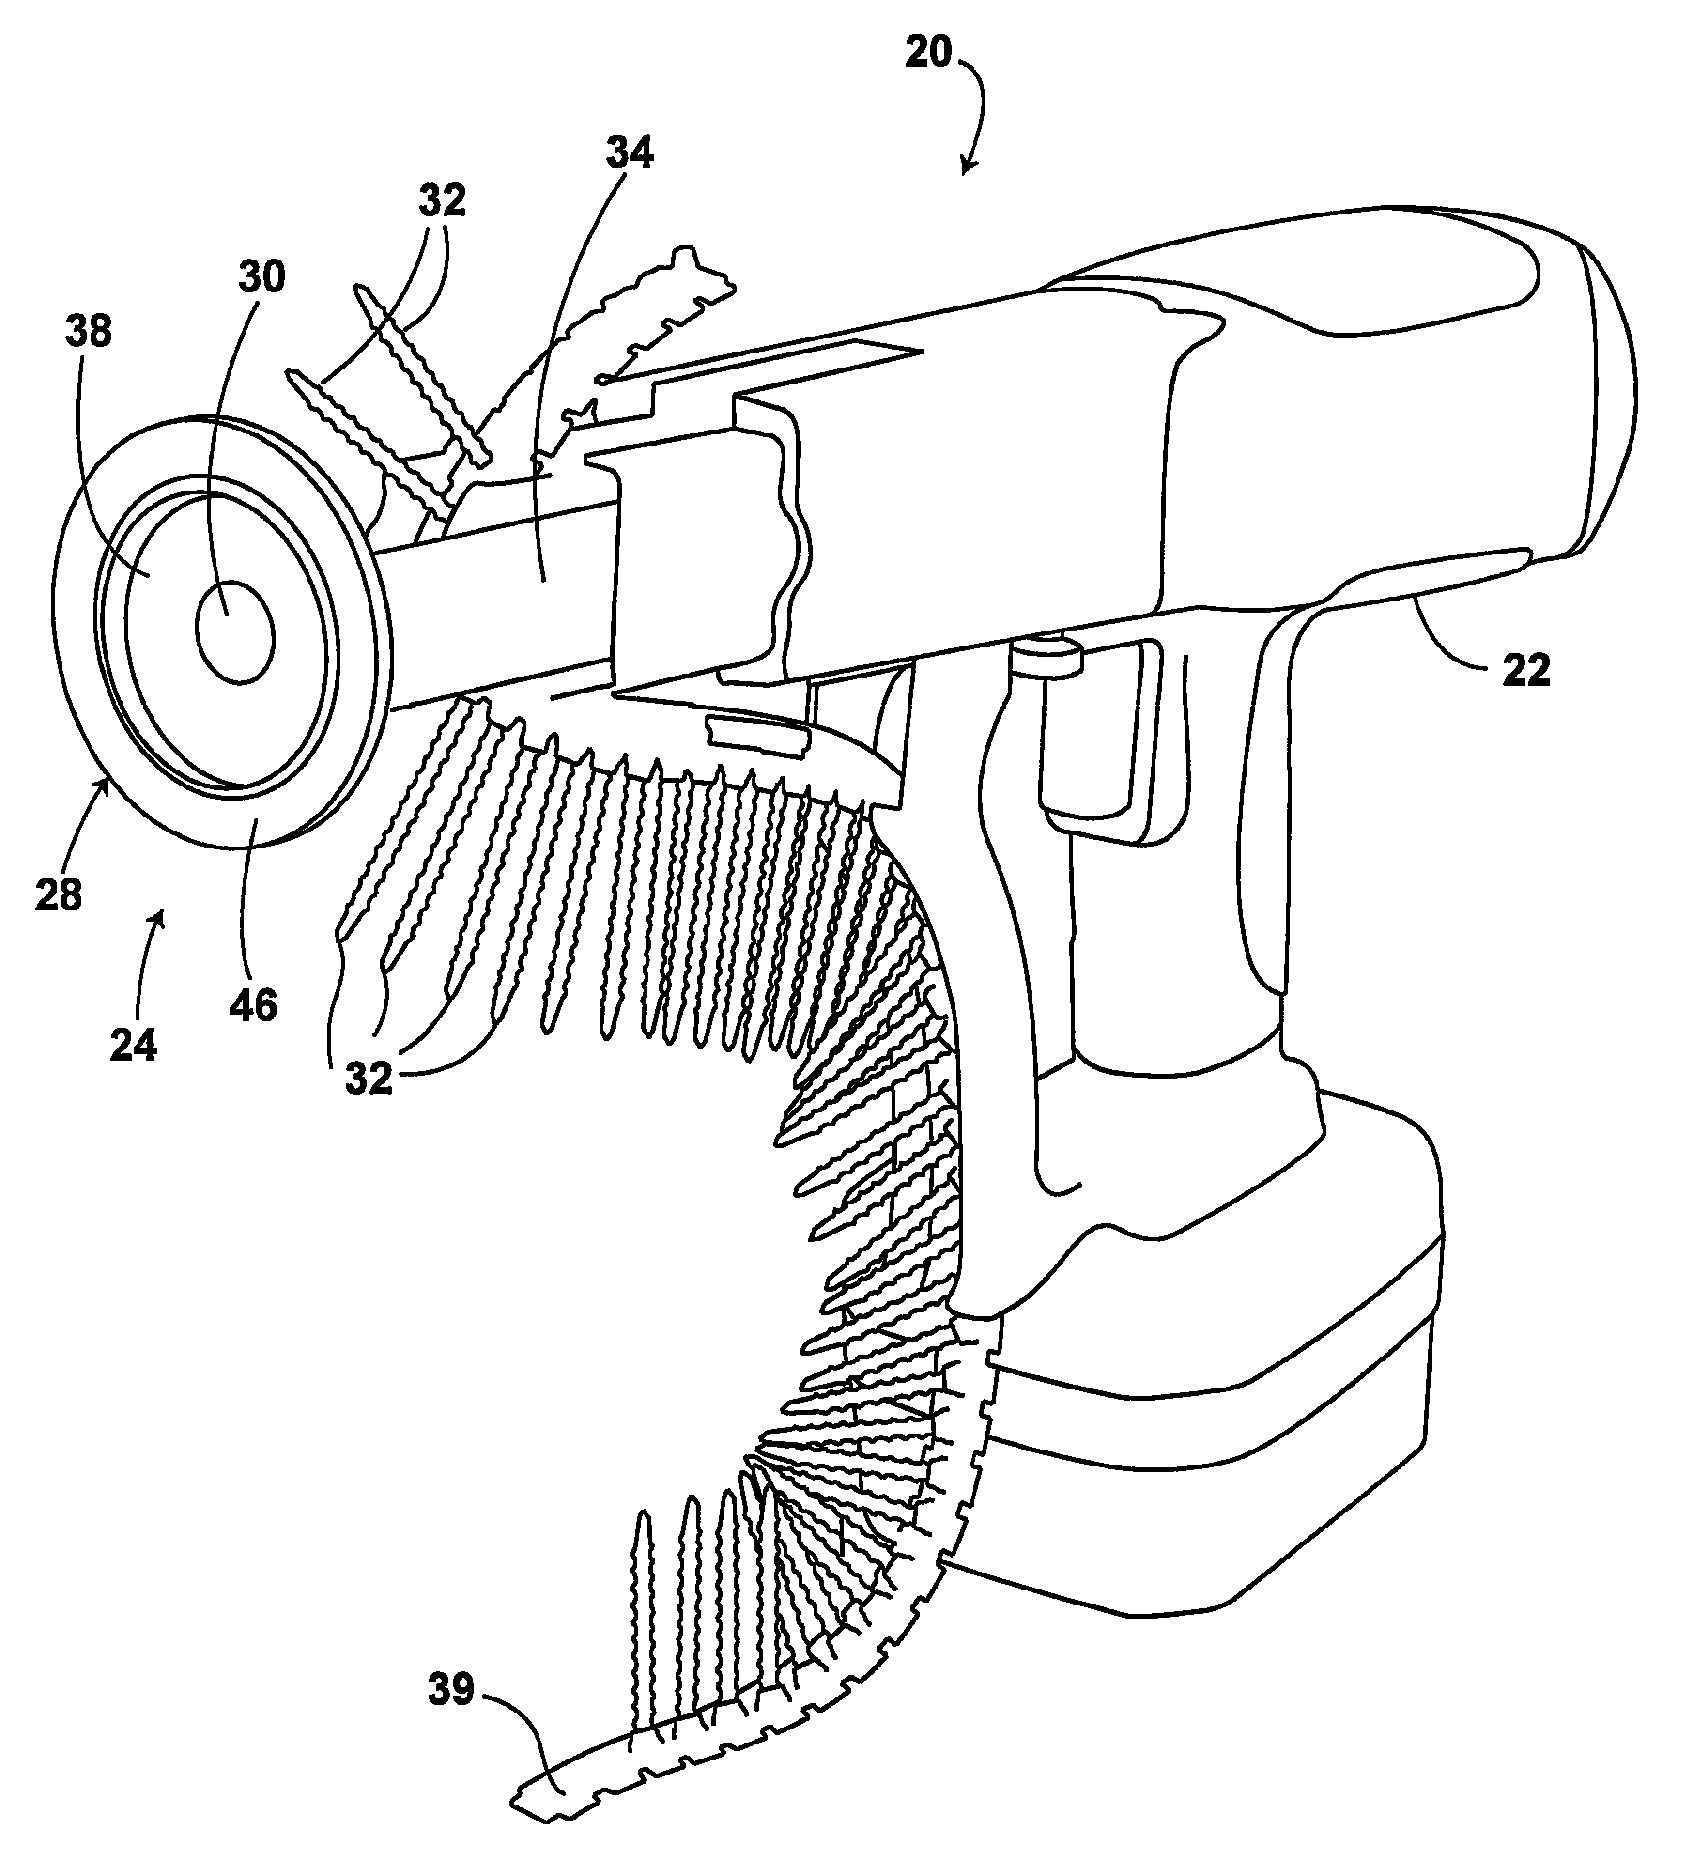 Fastener gun washer assembly holding device and method of use